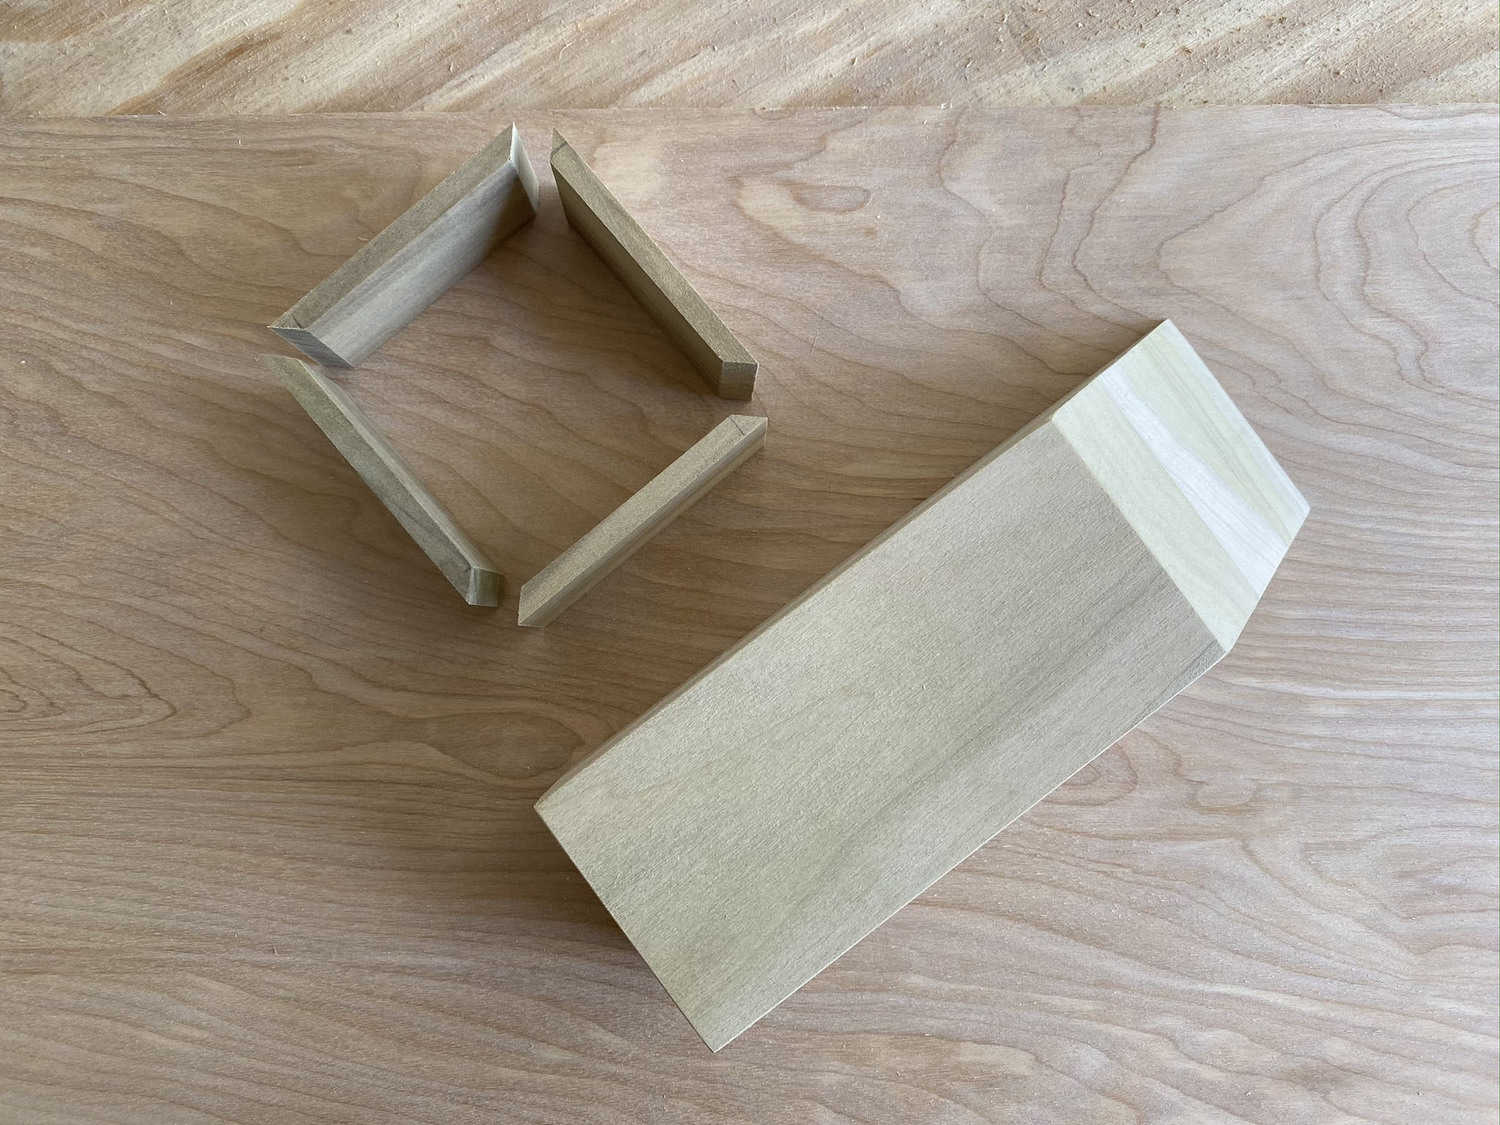 4 small pieces of wood in a square shape